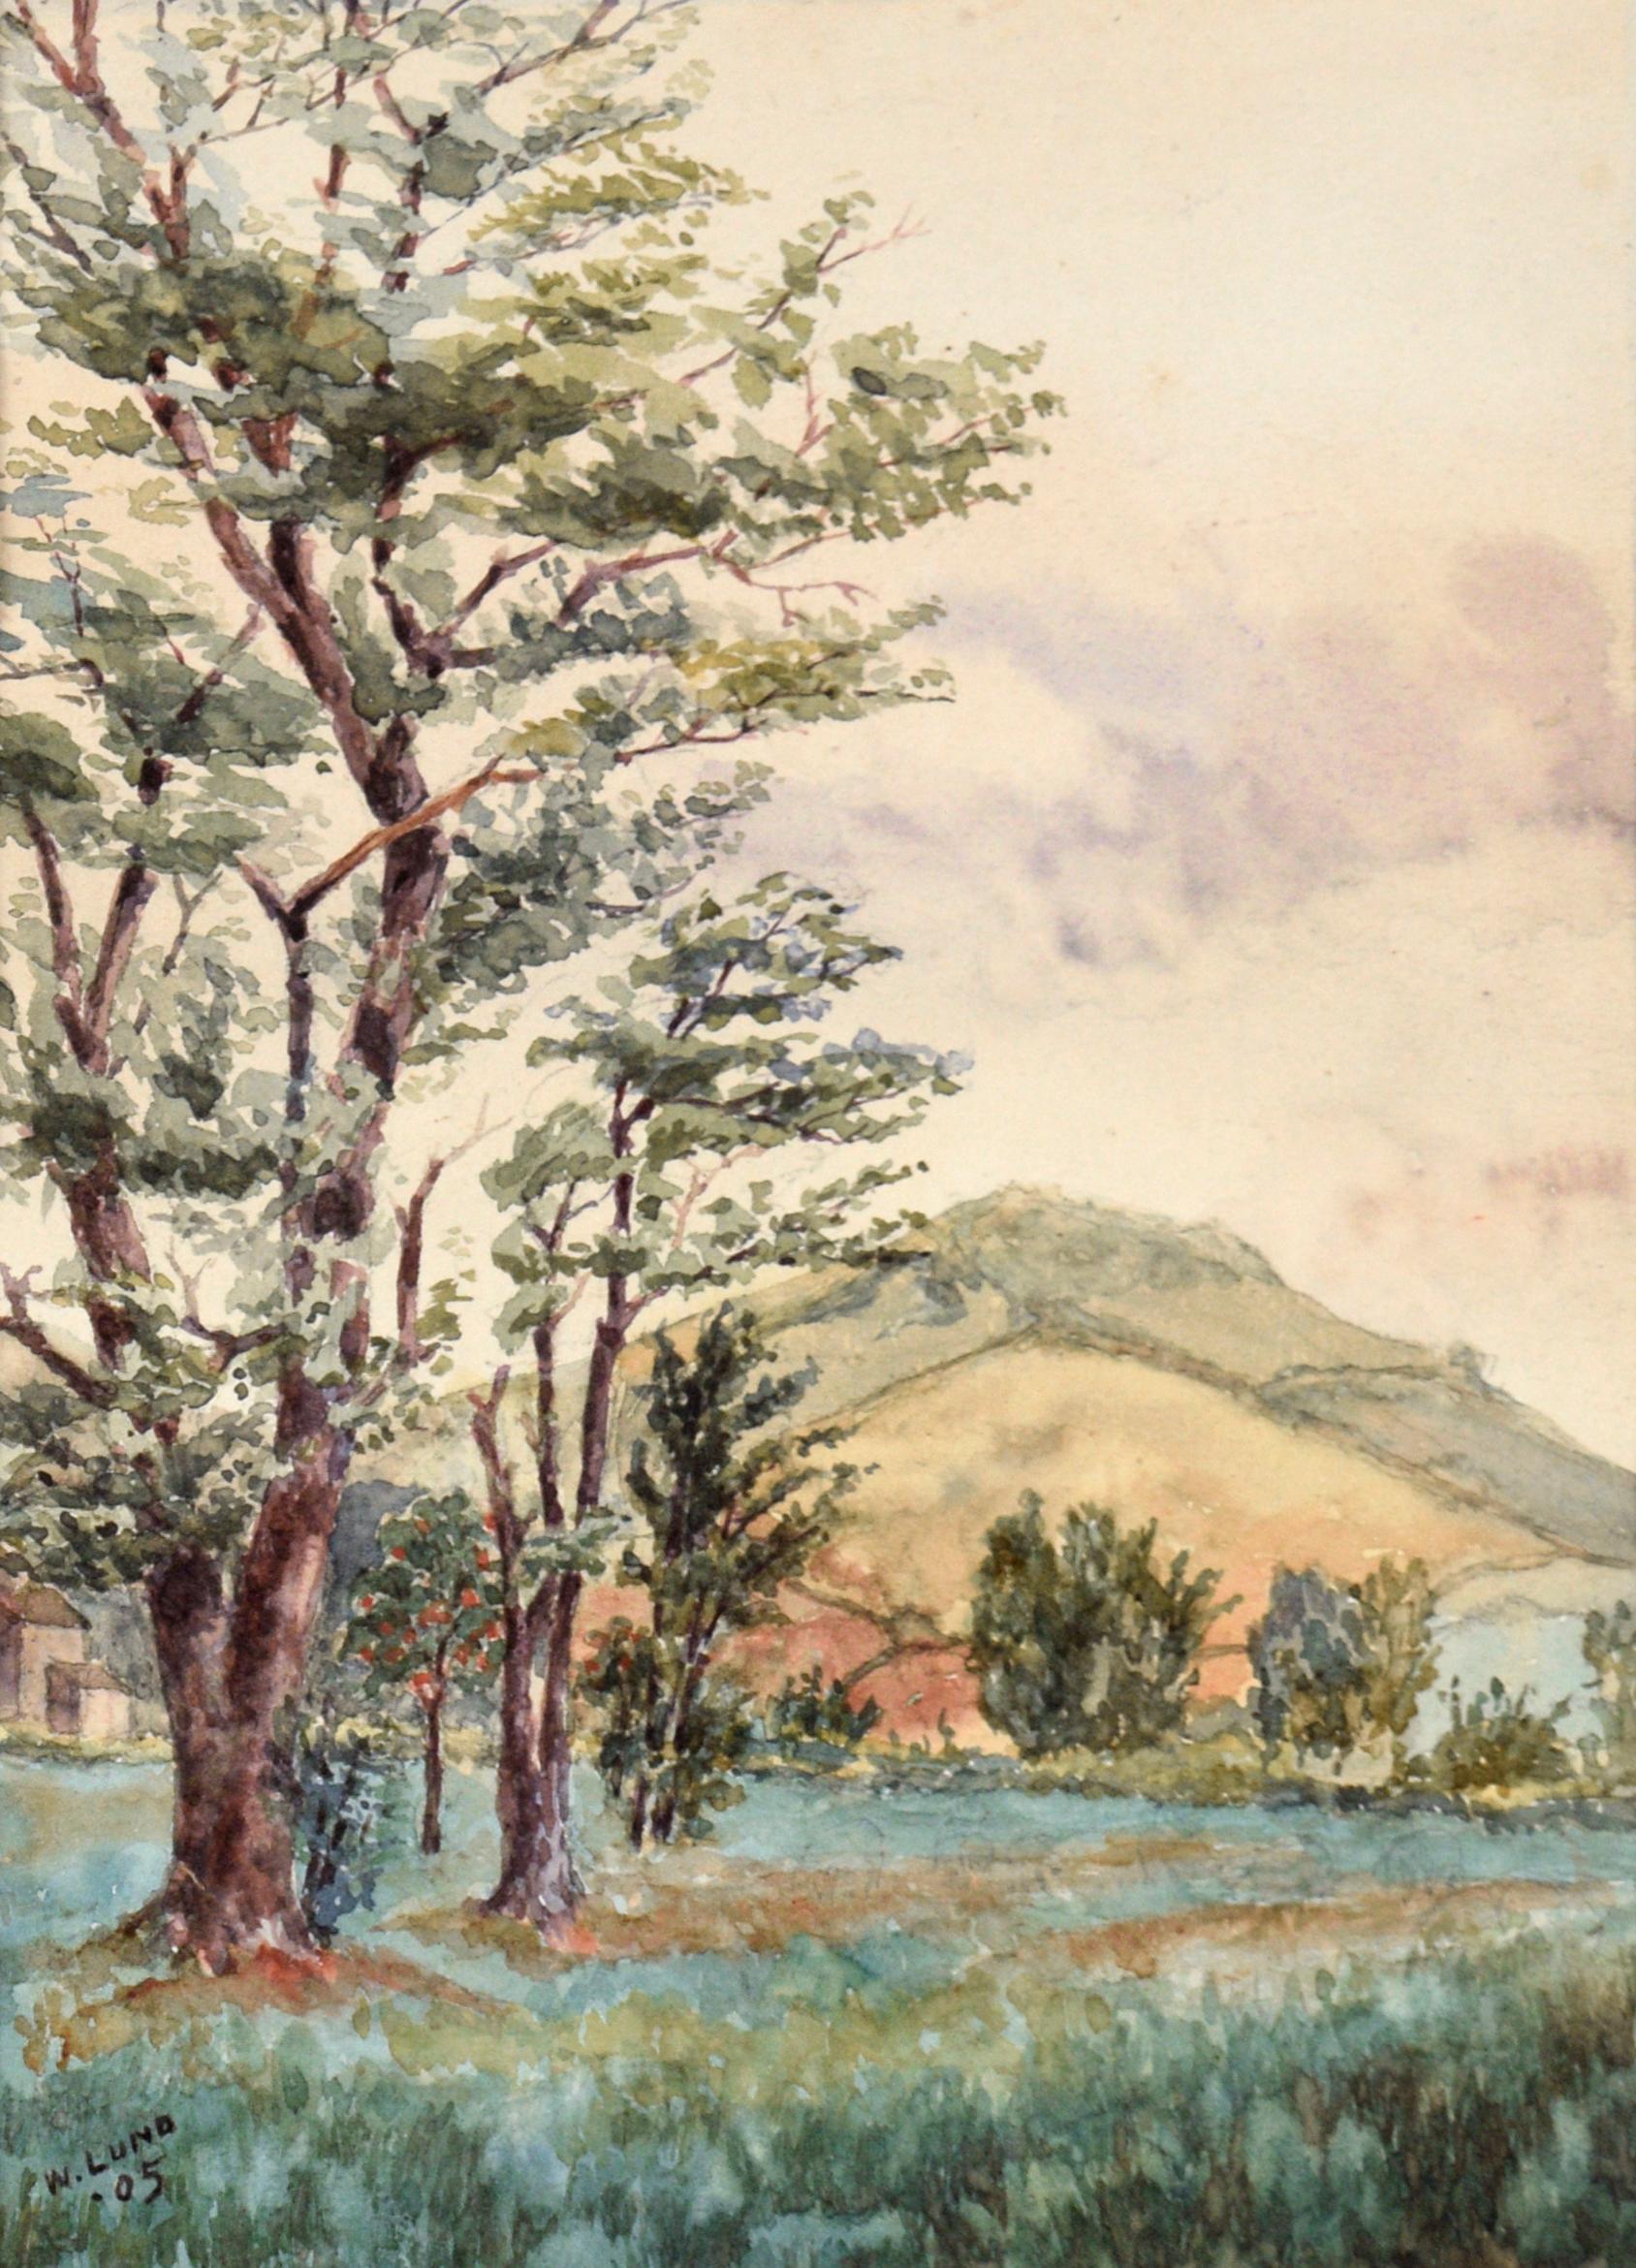 Aquarelle de Staten Island intitulée Valley and Mountains in West Brighton 1905 - Painting de W Lund